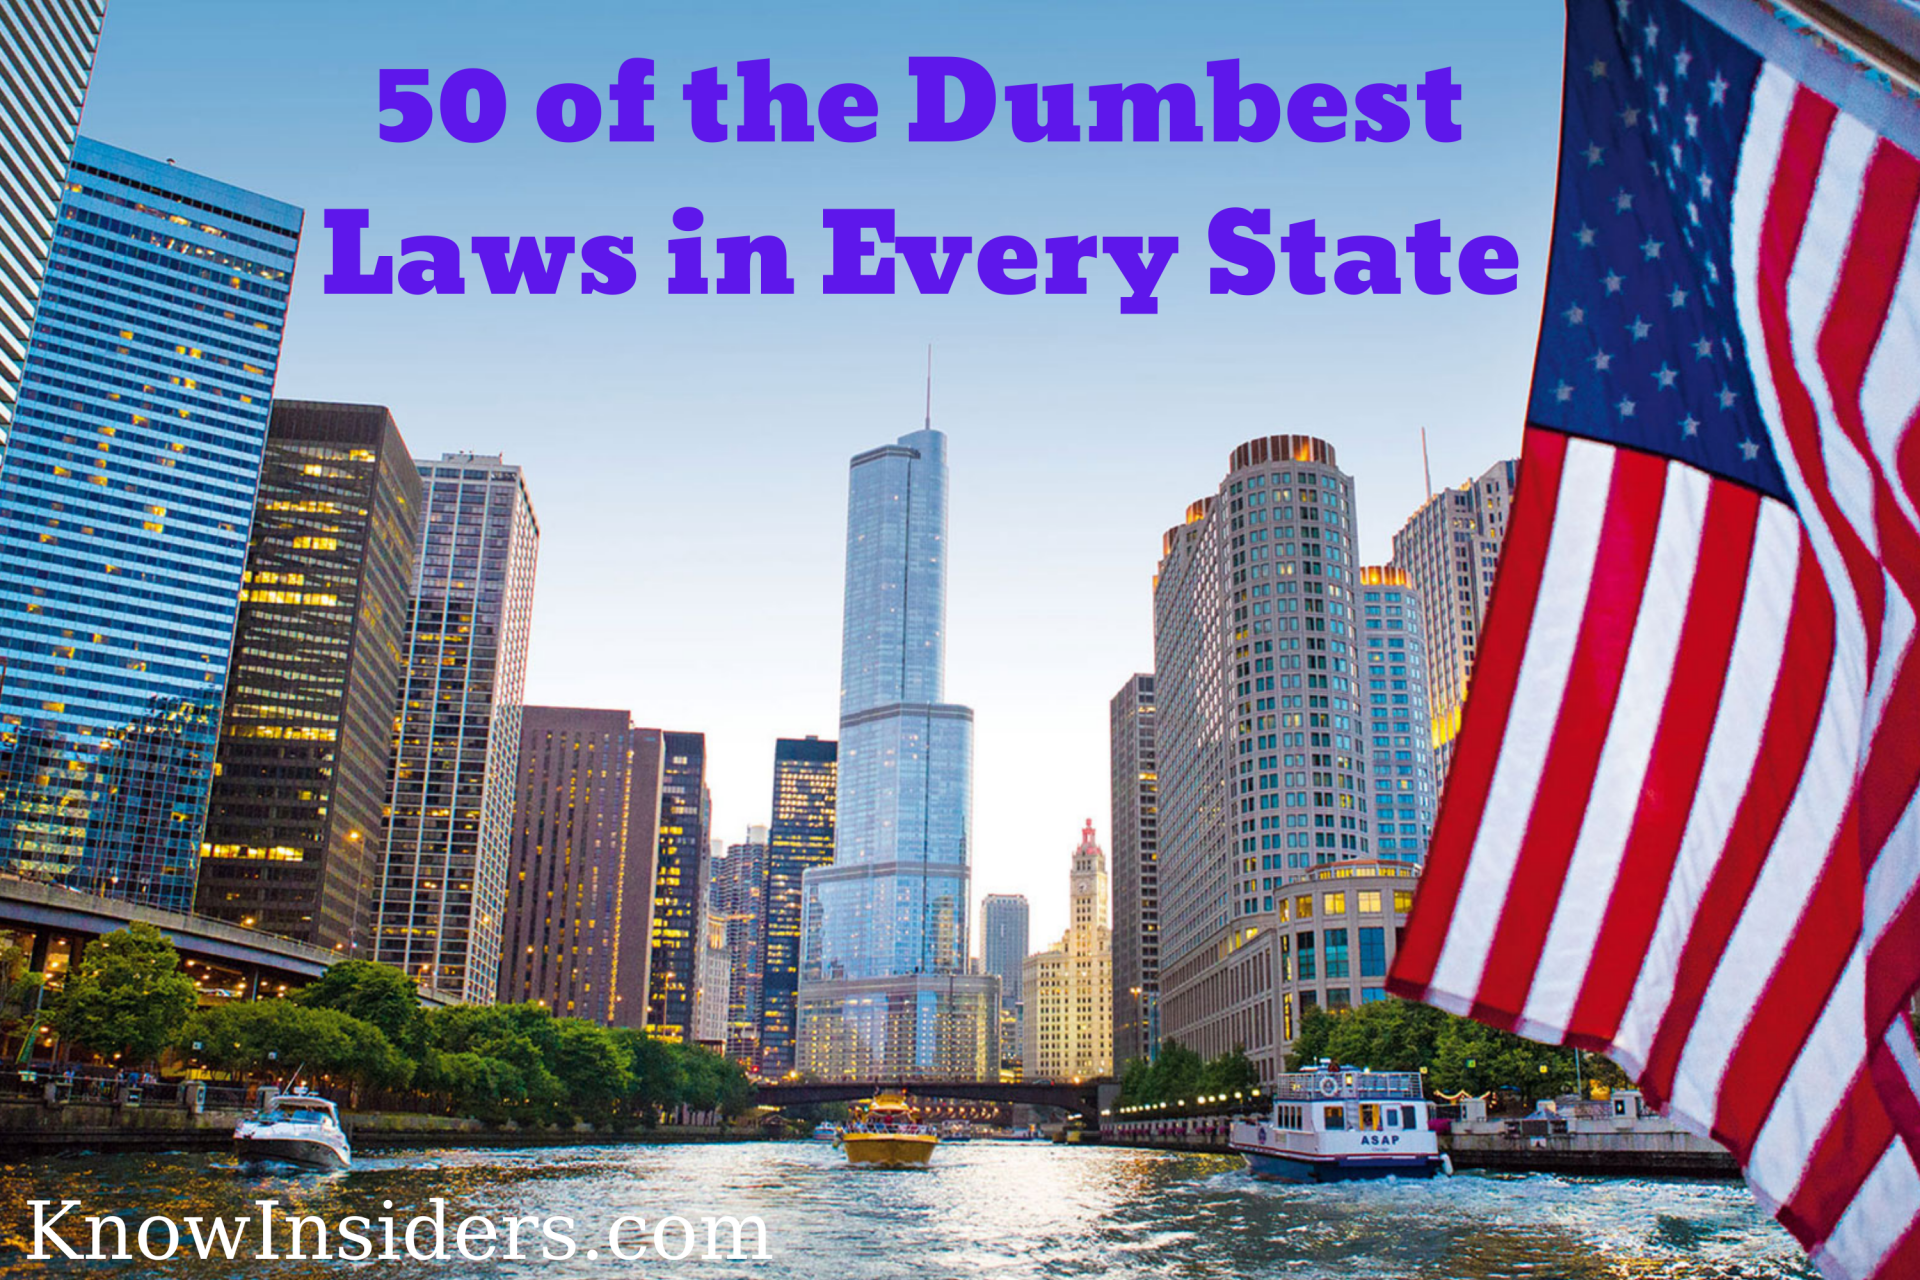 50 of the Dumbest Laws in Every State